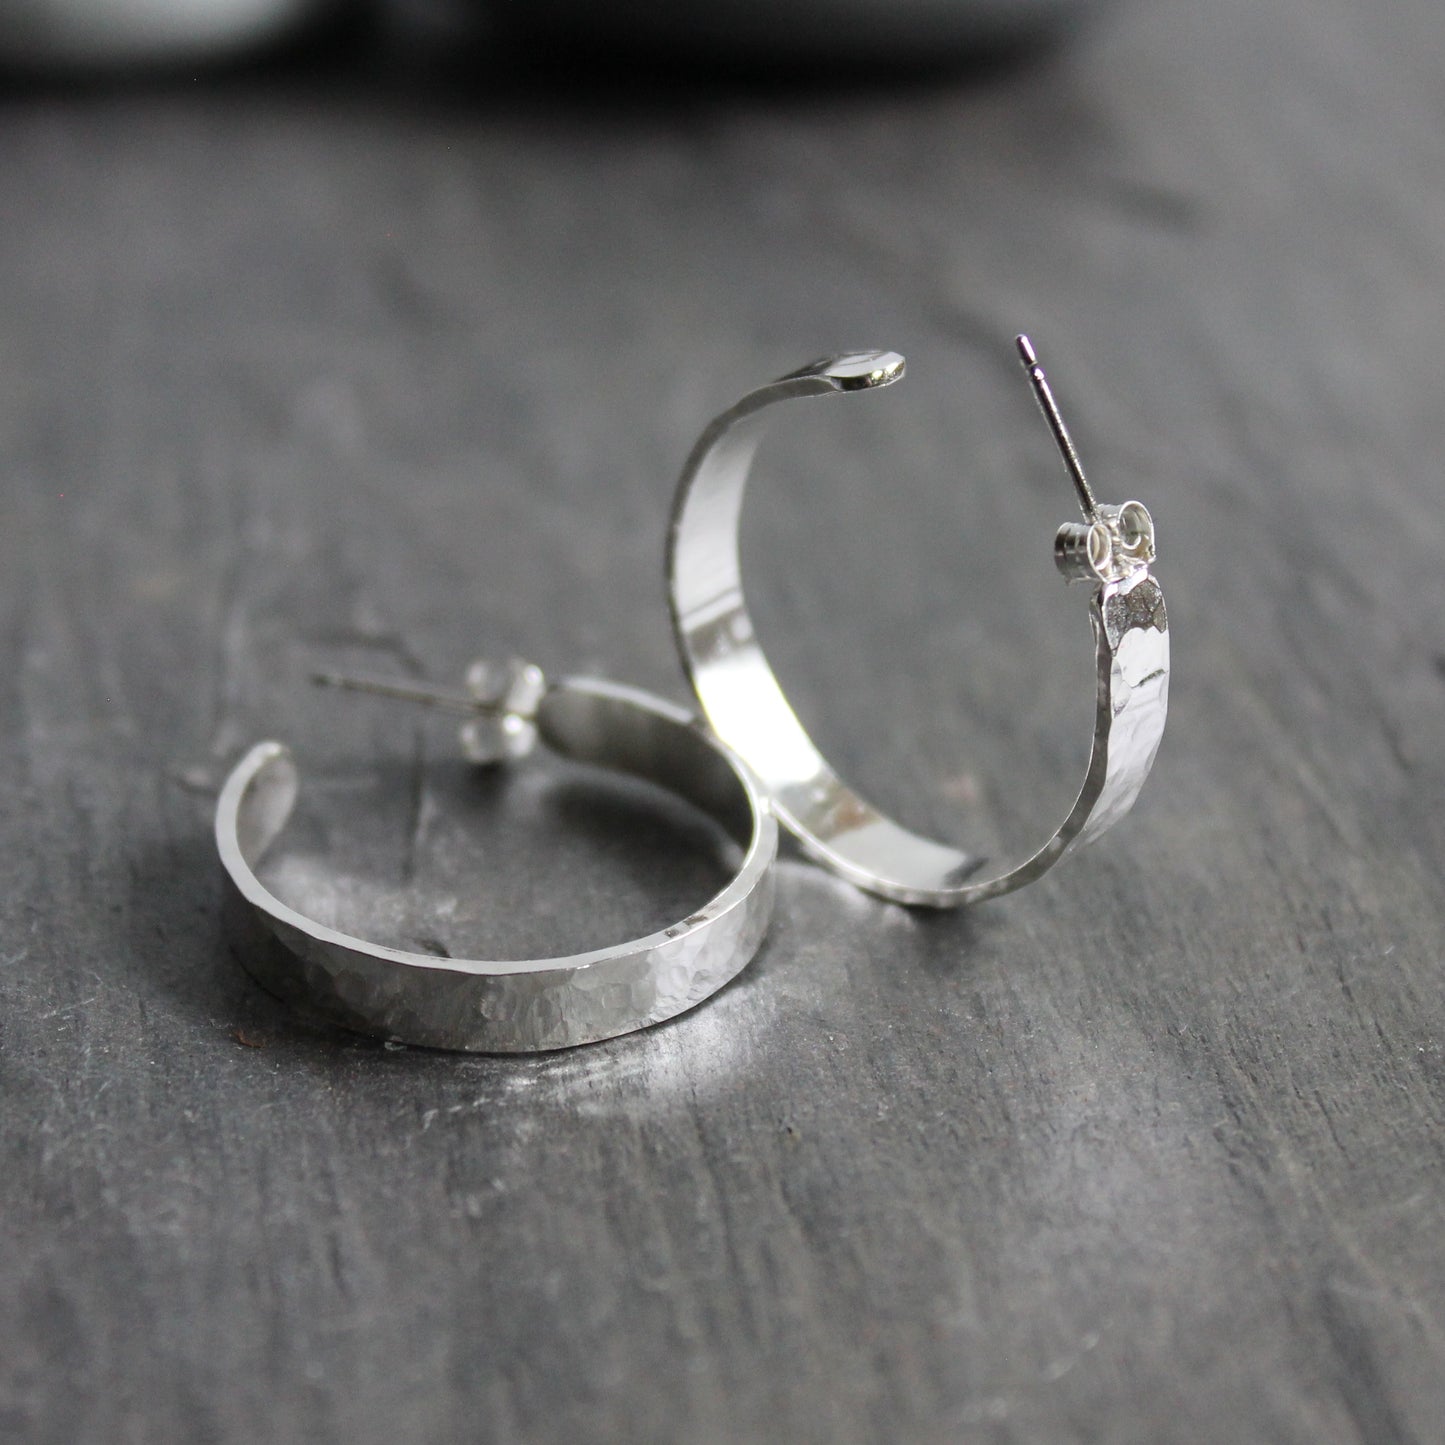 4mm wide hammered sterling silver hoop earrings on sterling silver posts that are about 1 inch in diameter. 